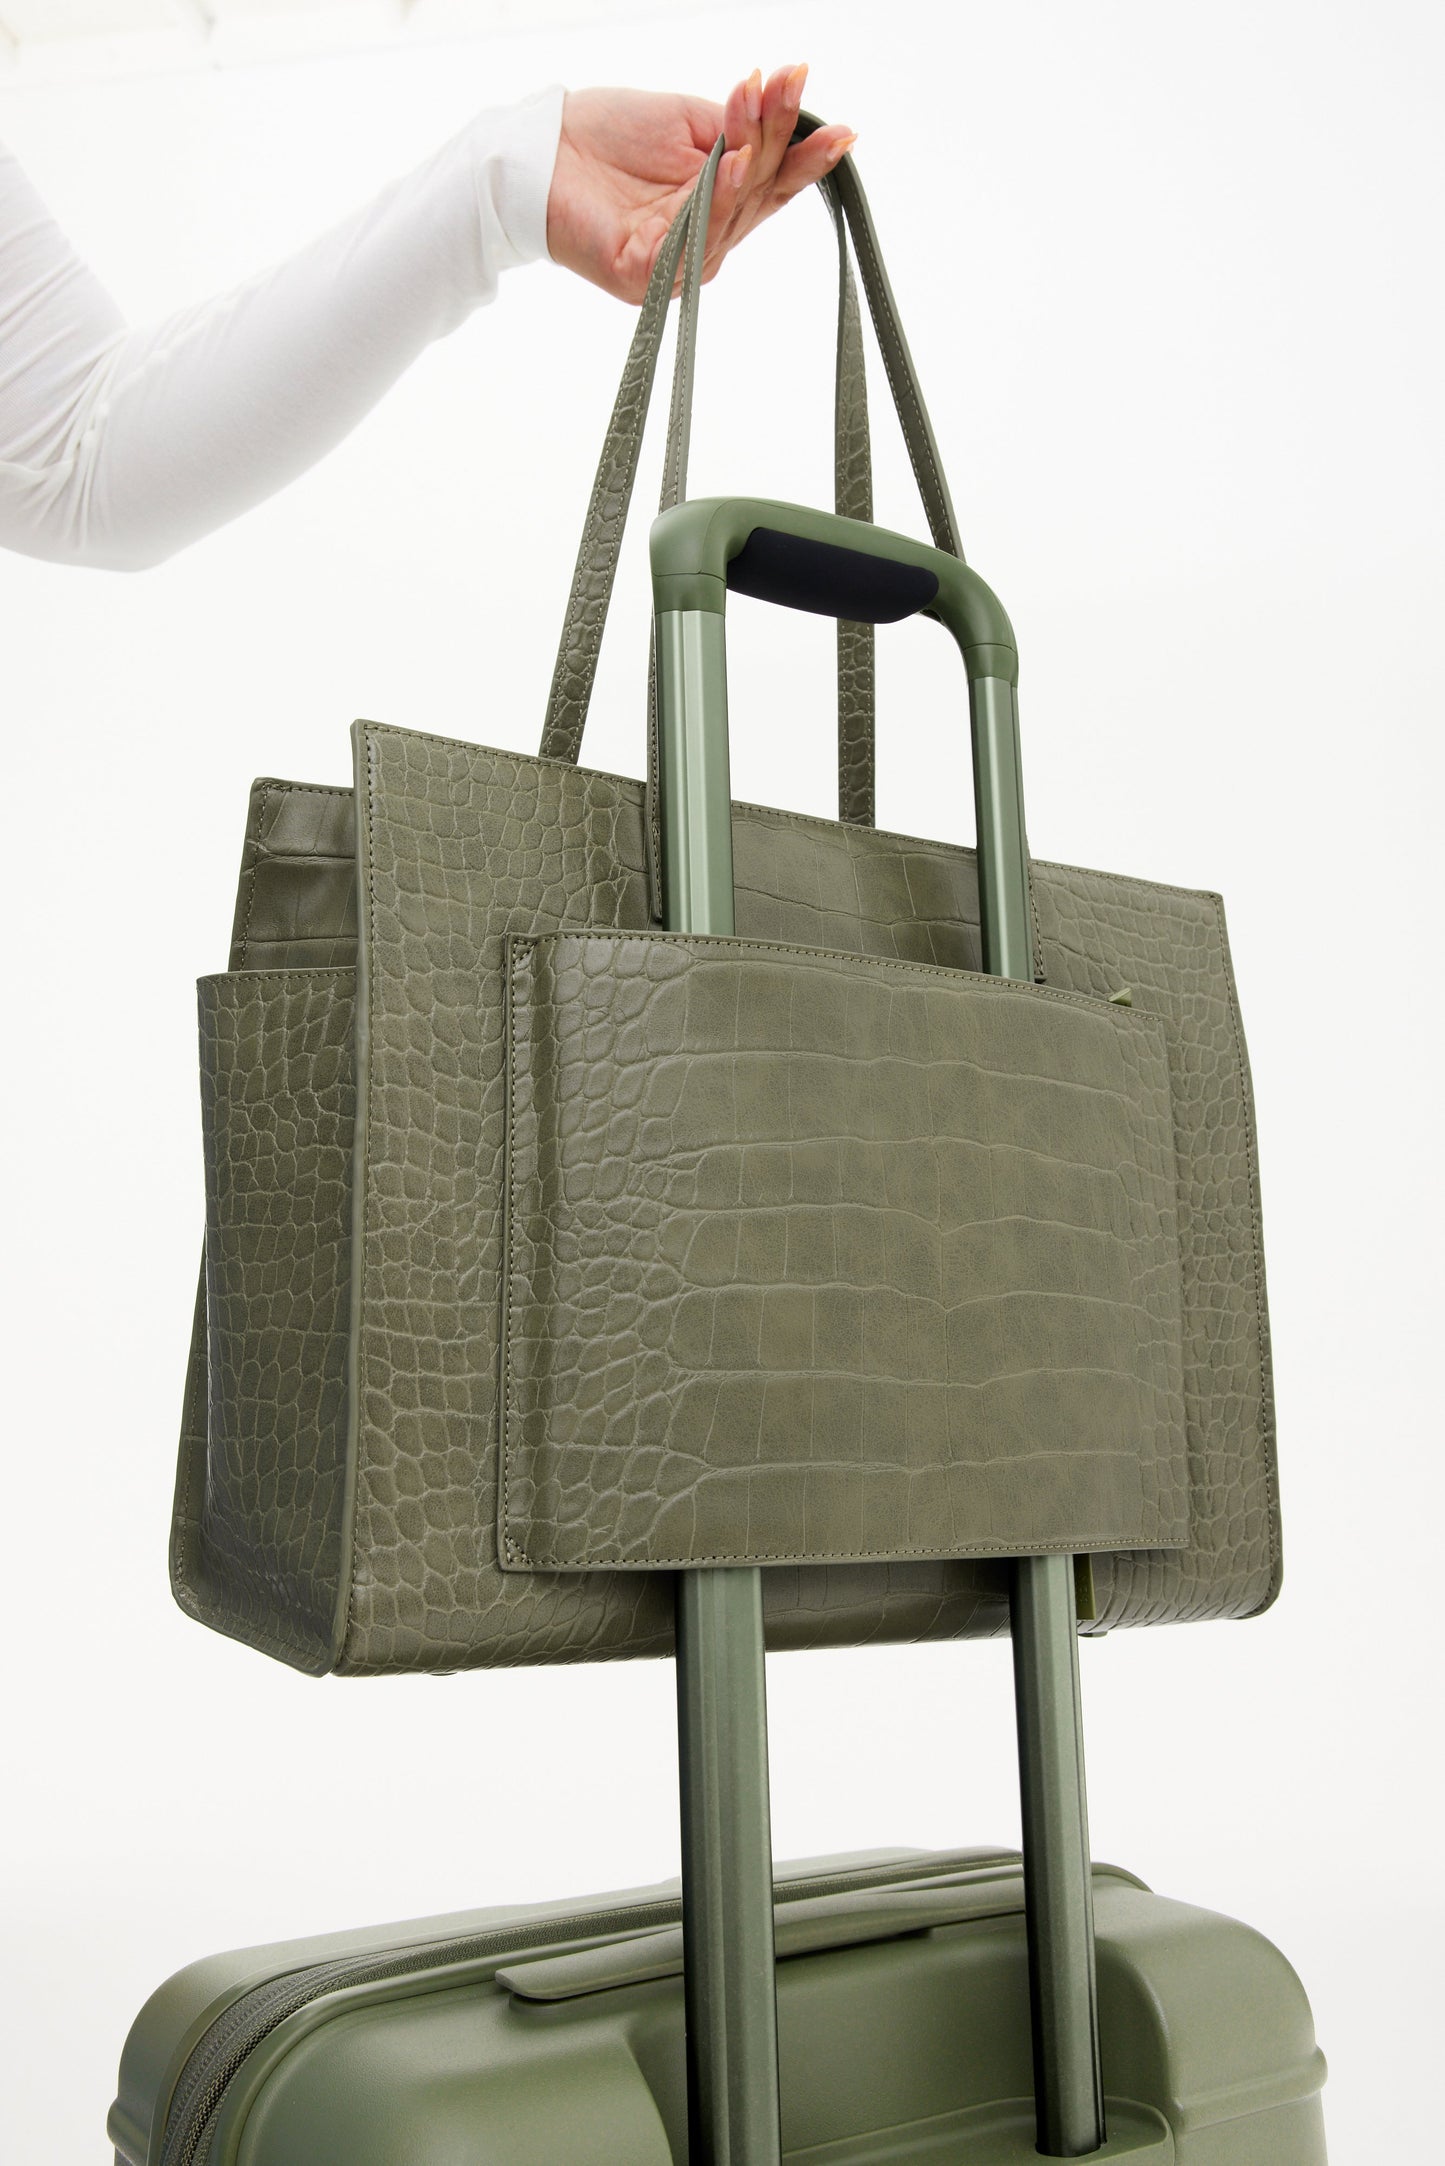 The Work Tote in Olive